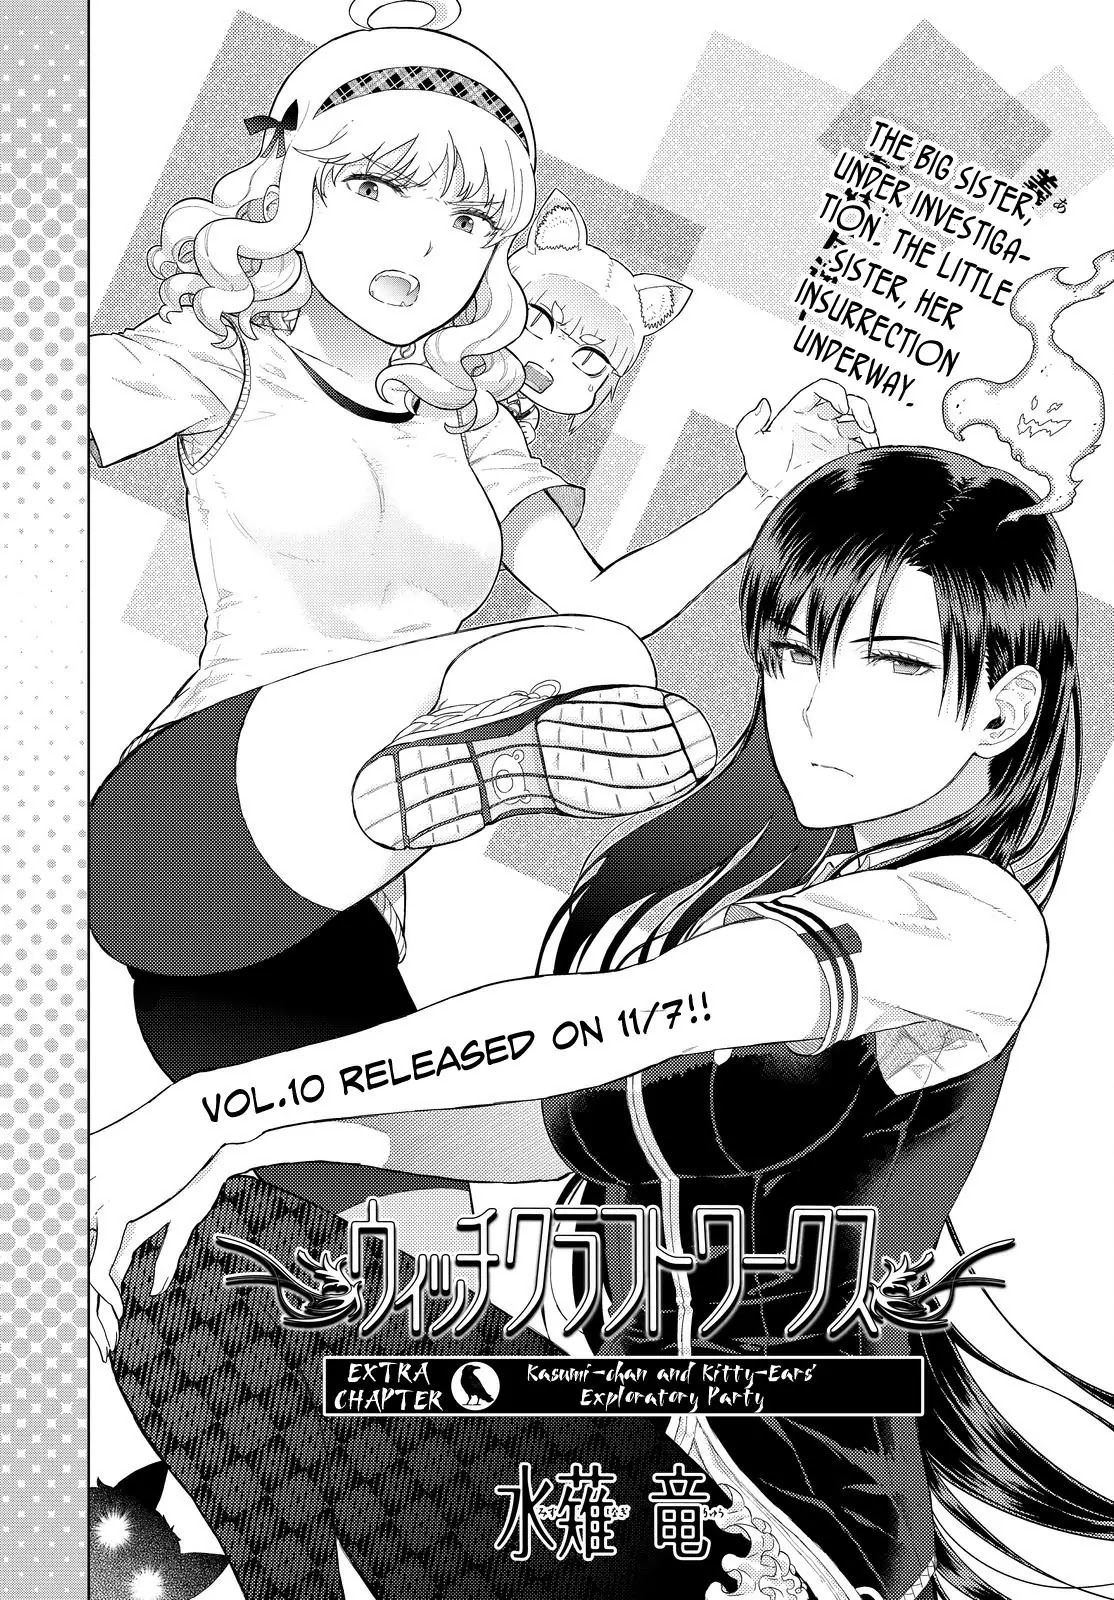 Witchcraft Works Extra Chapter: Kasumi-Chan And Kitty-Ears Exploratory Party - Picture 2